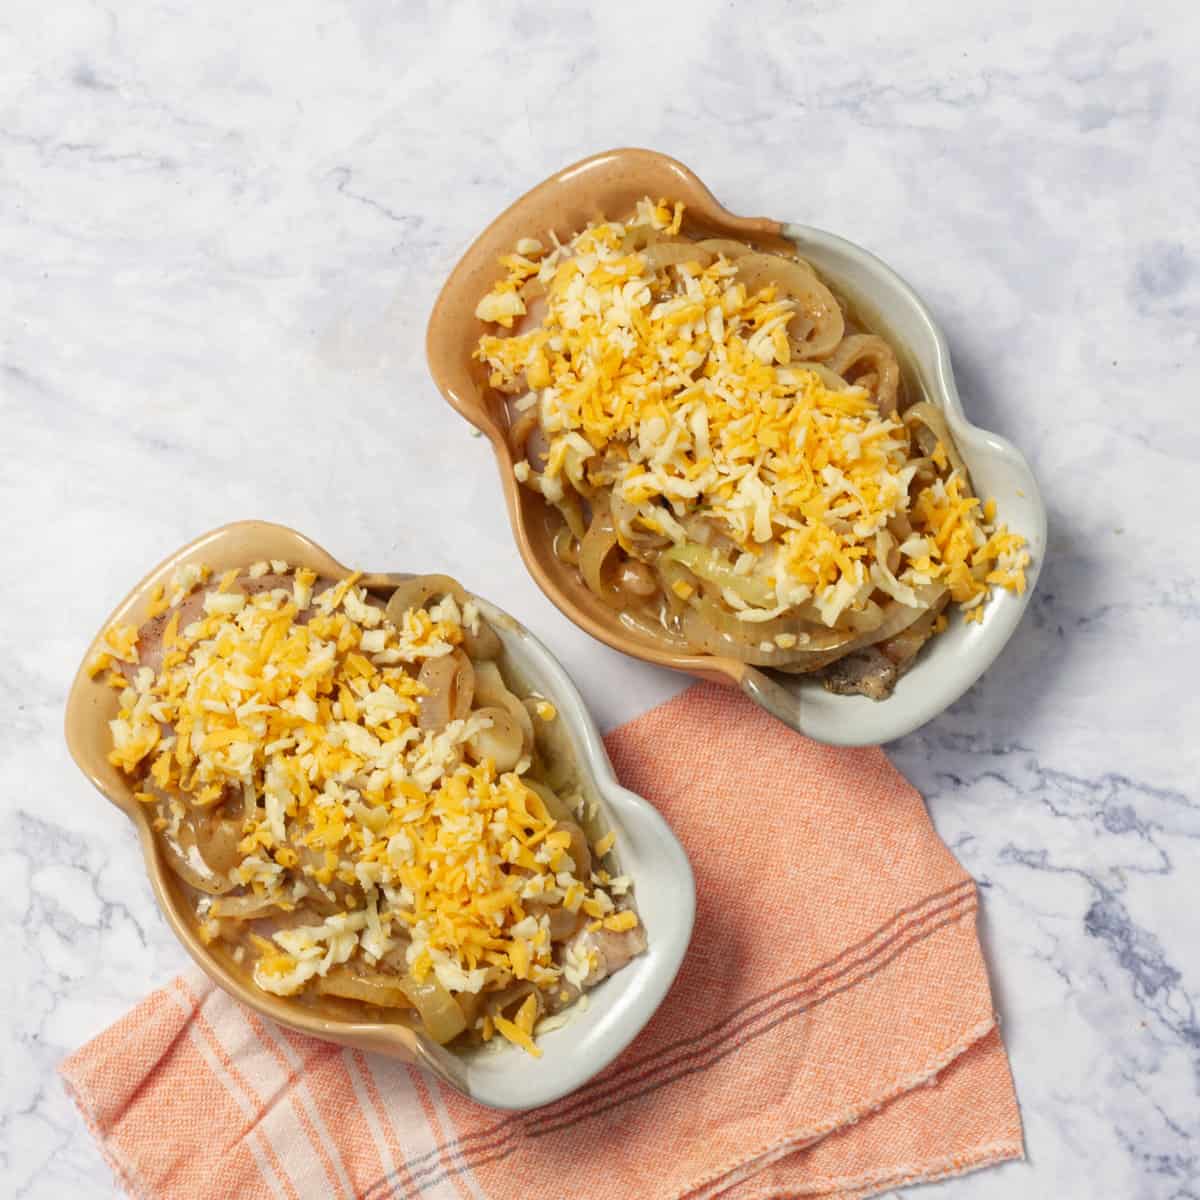 seasoned chicken supremes in a casseroles with the caramelized onions and cheese